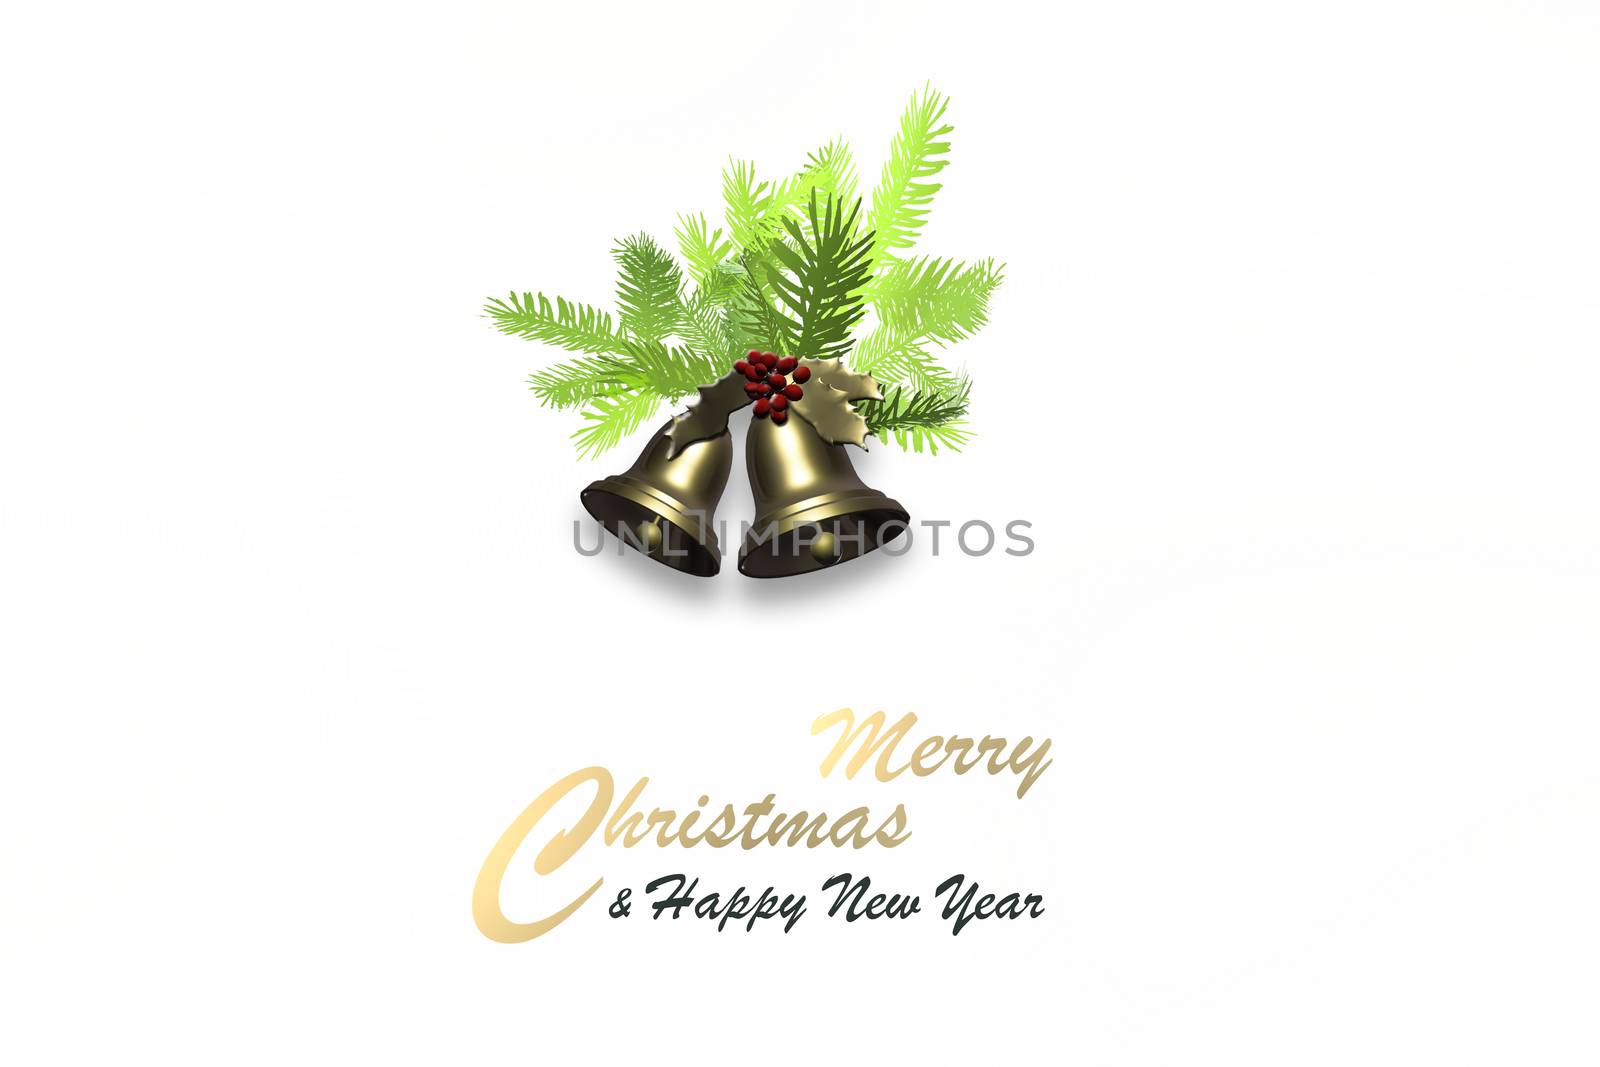 Minimalist Christmas background on white. Xmas bell, fir branches, gold text Merry Christmas Happy New Year. Place for text. Header, invitation, 3D render